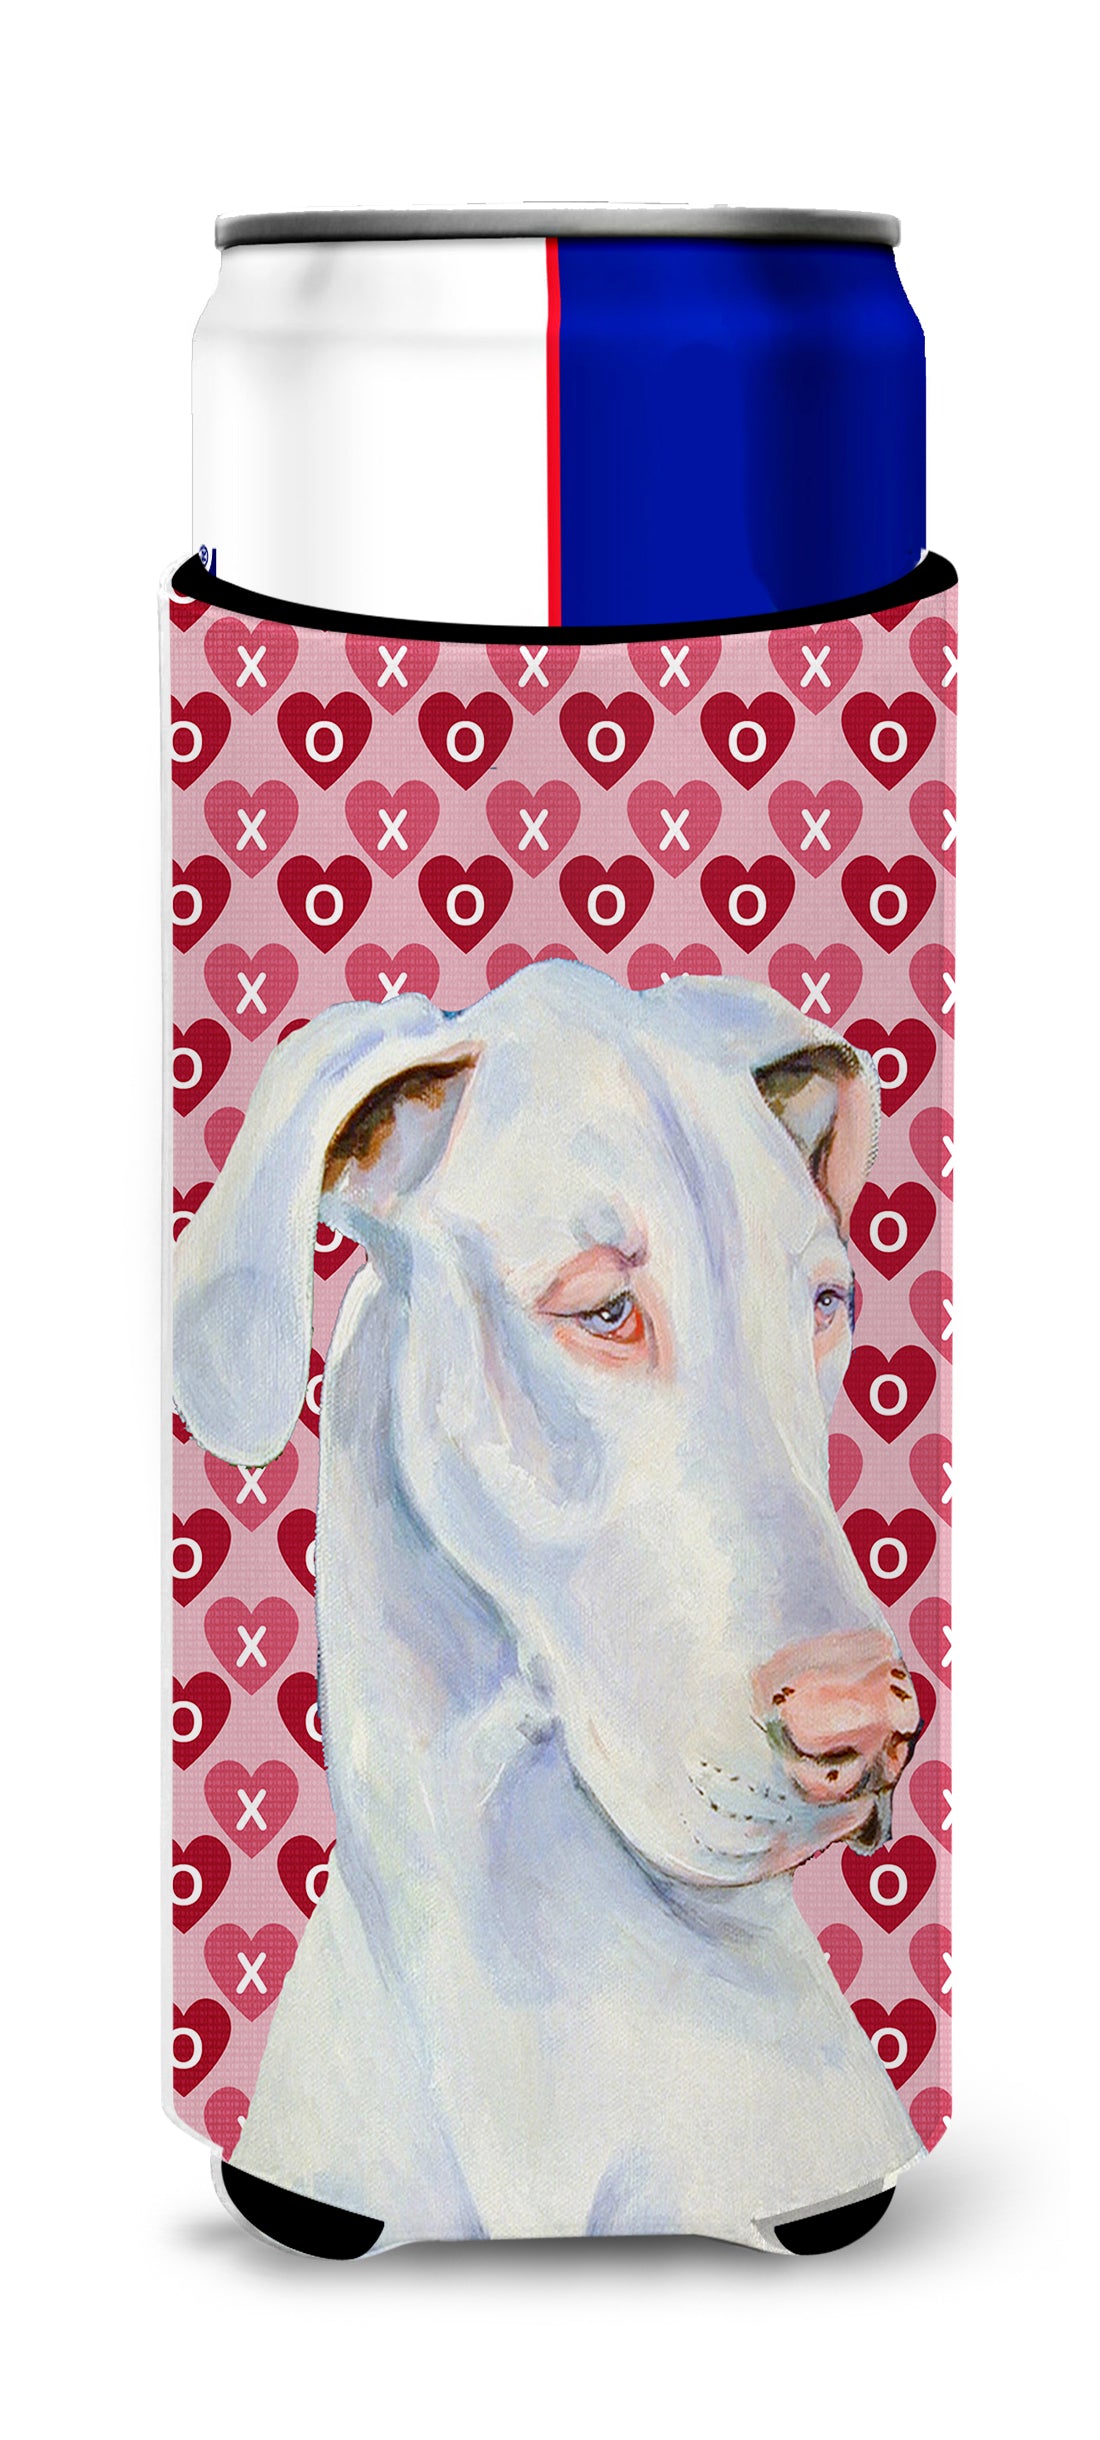 Great Dane Hearts Love and Valentine's Day Portrait Ultra Beverage Insulators for slim cans LH9131MUK.